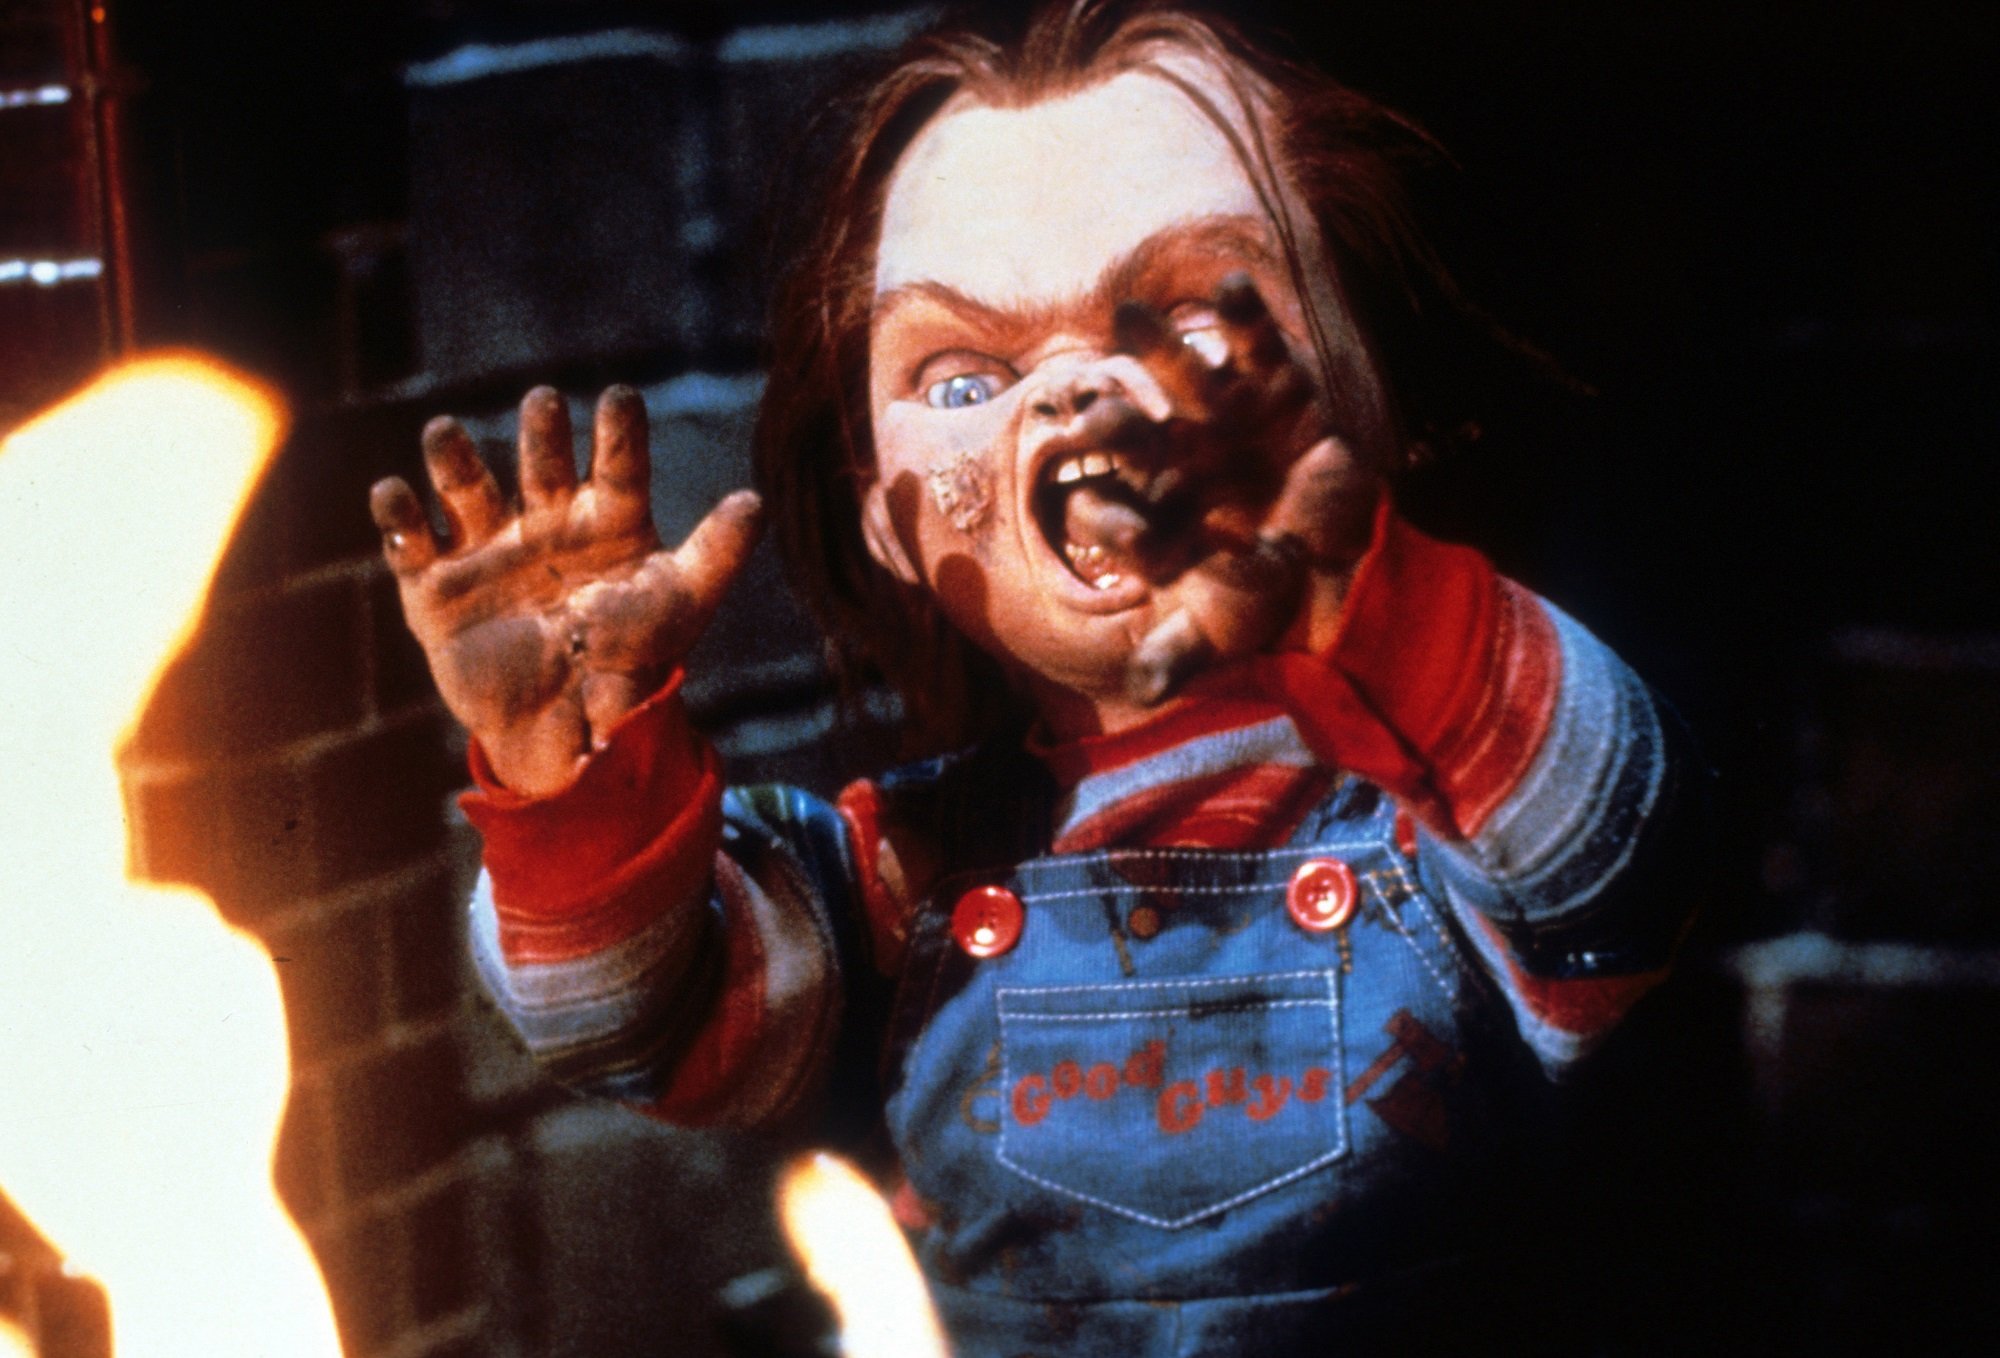 'Child's Play' killer doll Chucky gets burned in the fire place